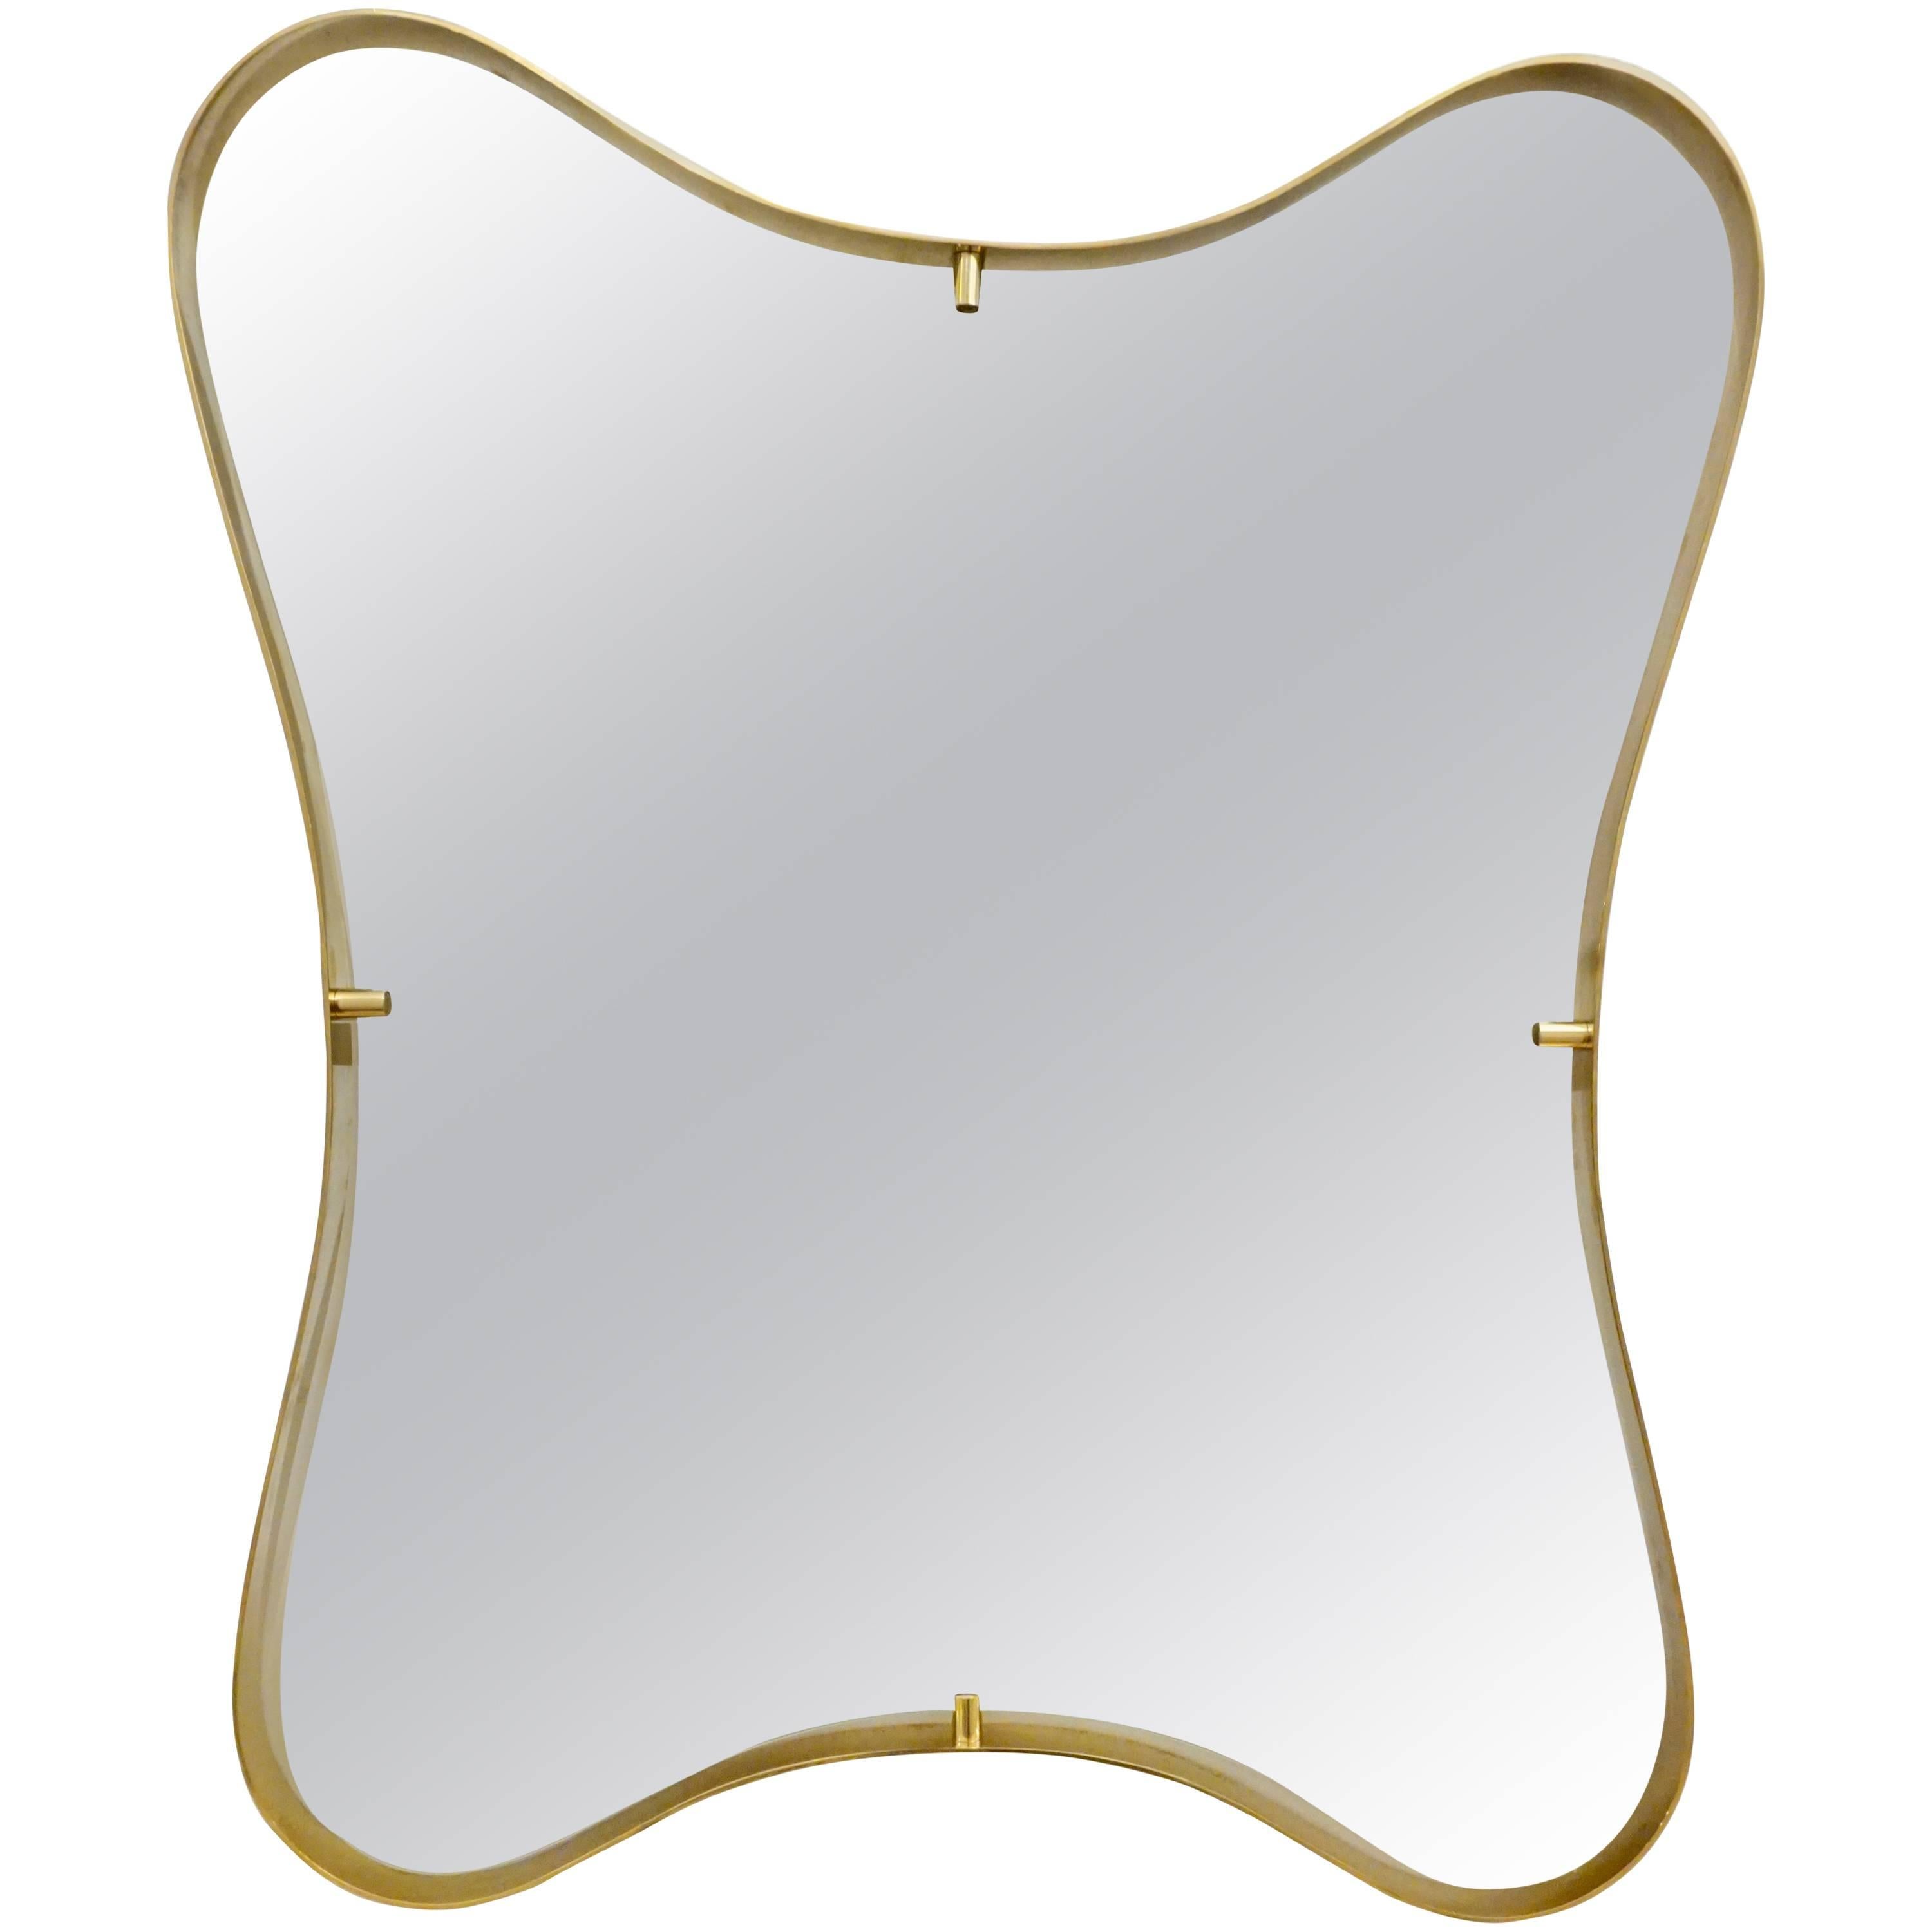 Contemporary Italian modern design mirror with elegant curved brass frame detached from the mirror, entirely handcrafted, showing a sensual smooth wavelike motion design.
The mirror ends in a slight bevelled rounded edge and shows high quality of